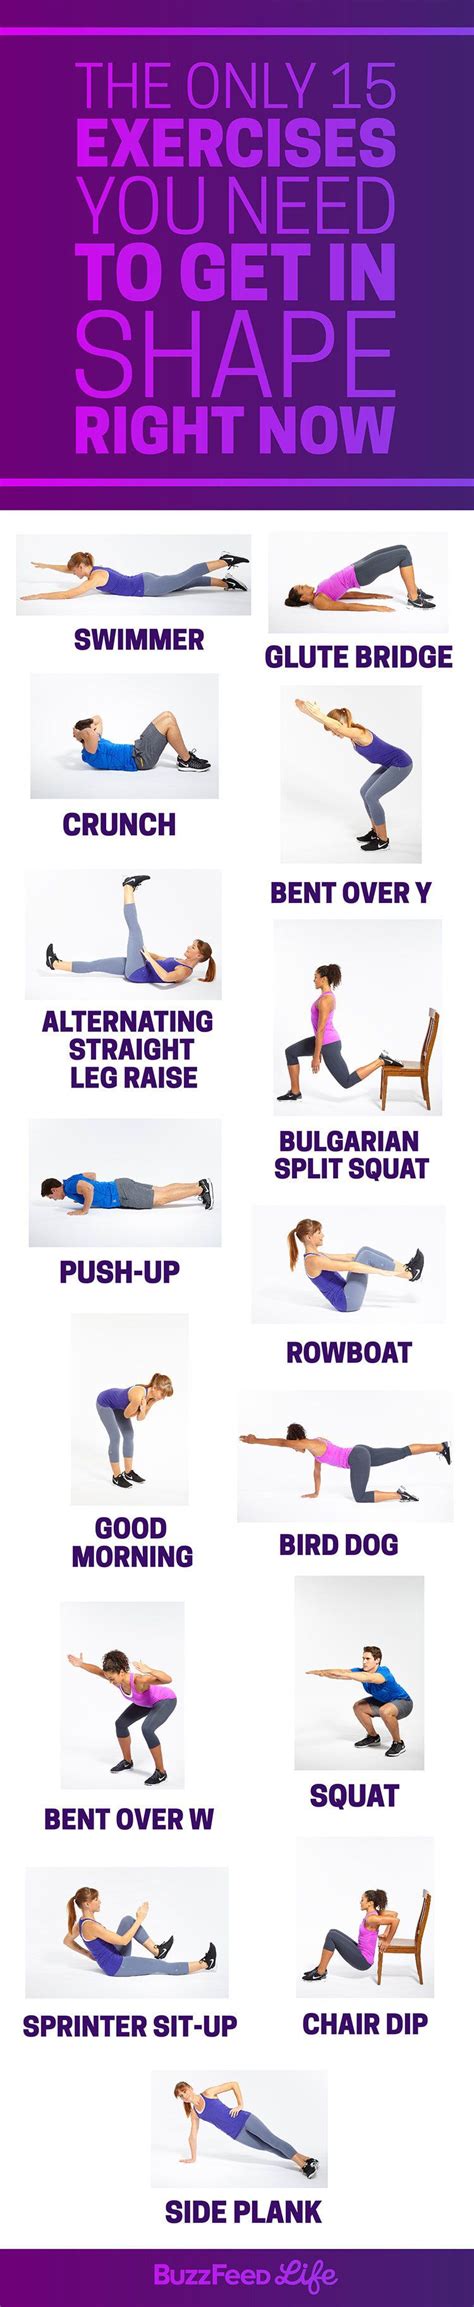 Here Are The Only 15 Exercises You Need To Get In Shape Anywhere